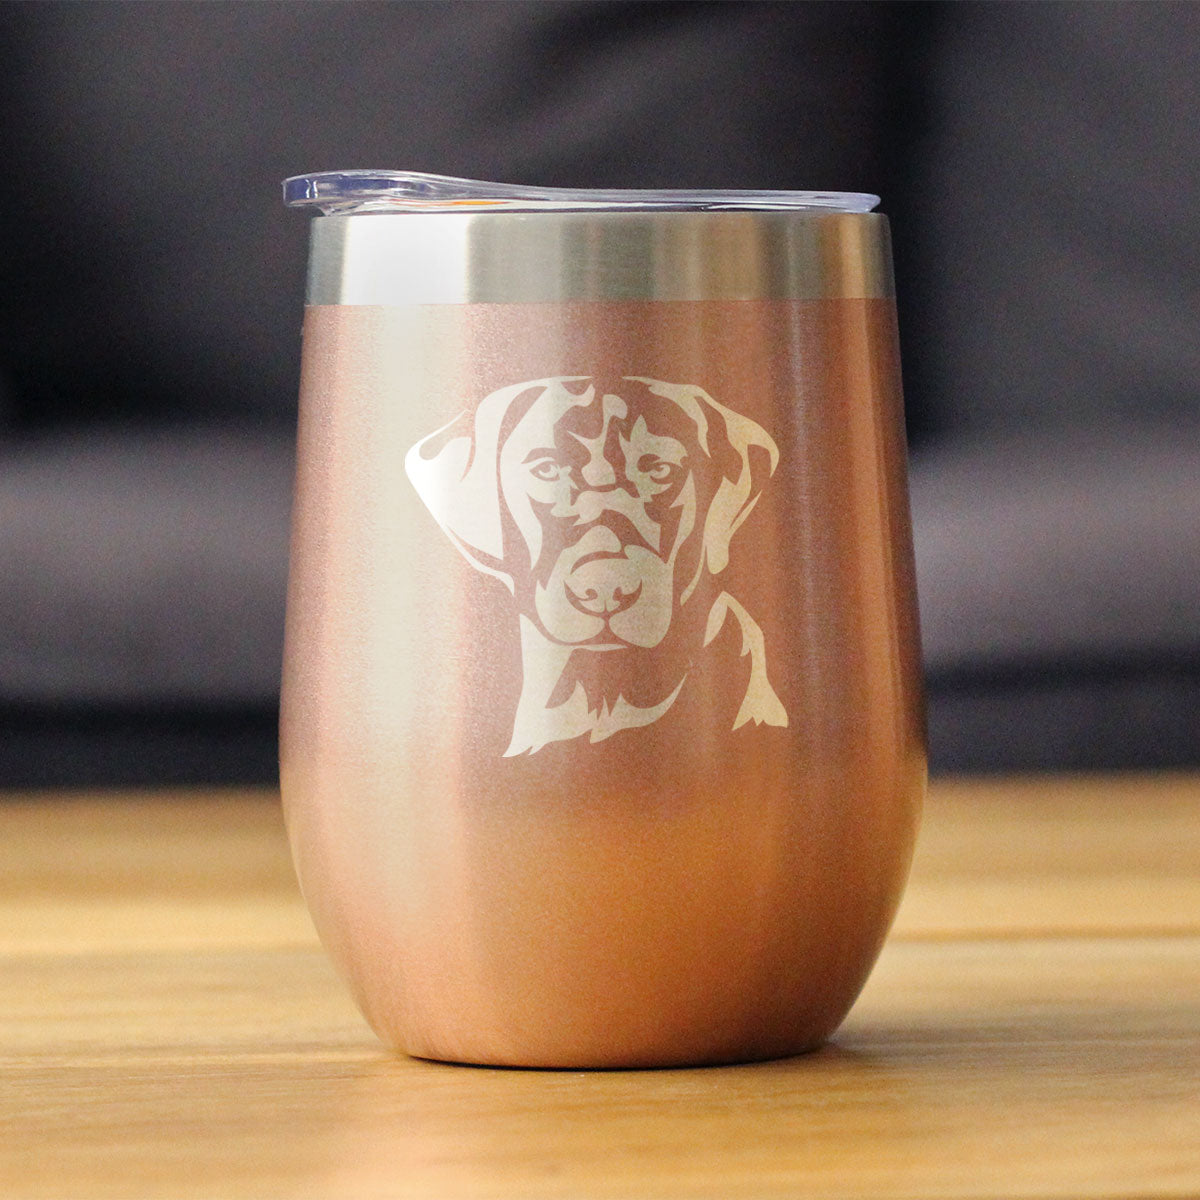 Black Lab Face Wine Tumbler with Sliding Lid - Stemless Stainless Steel Insulated Cup - Labrador Retriever Outdoor Camping Mug